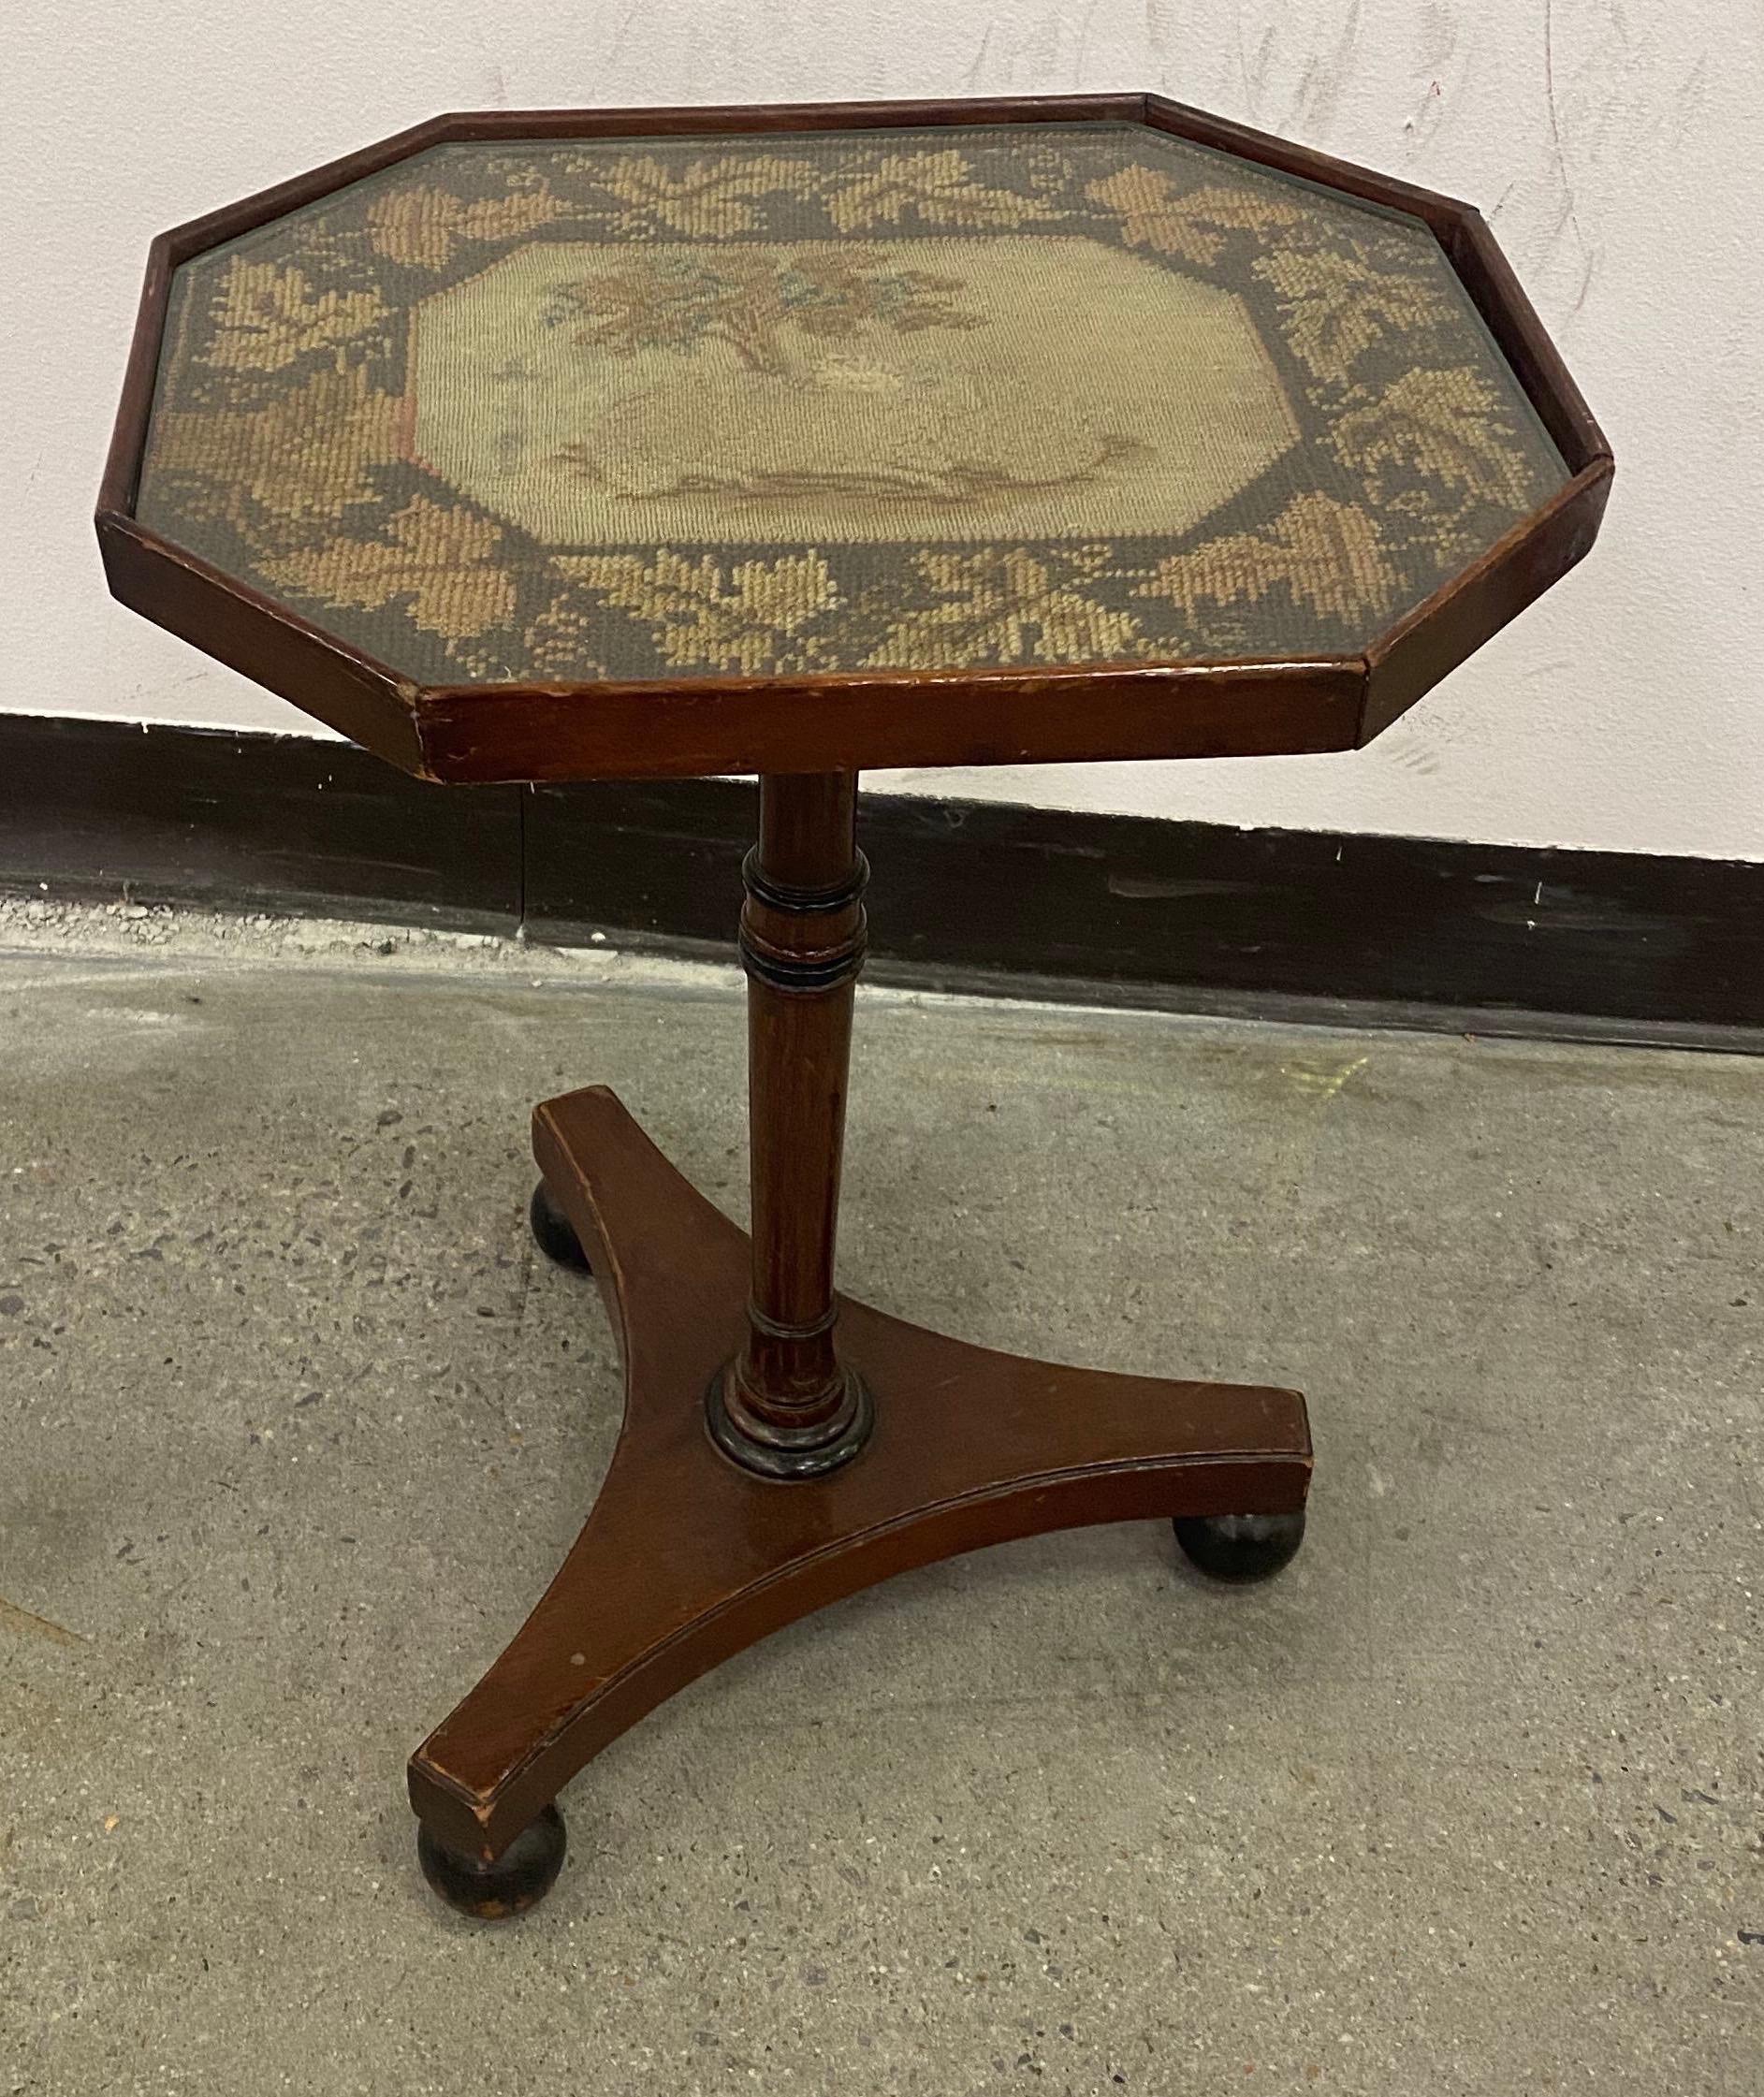 Great little 19th century English Regency embroidered top mahogany side table on ball feet. Top is made of a embroidered scene of sheep resting under a tree. Topped off with cut glass to protect.